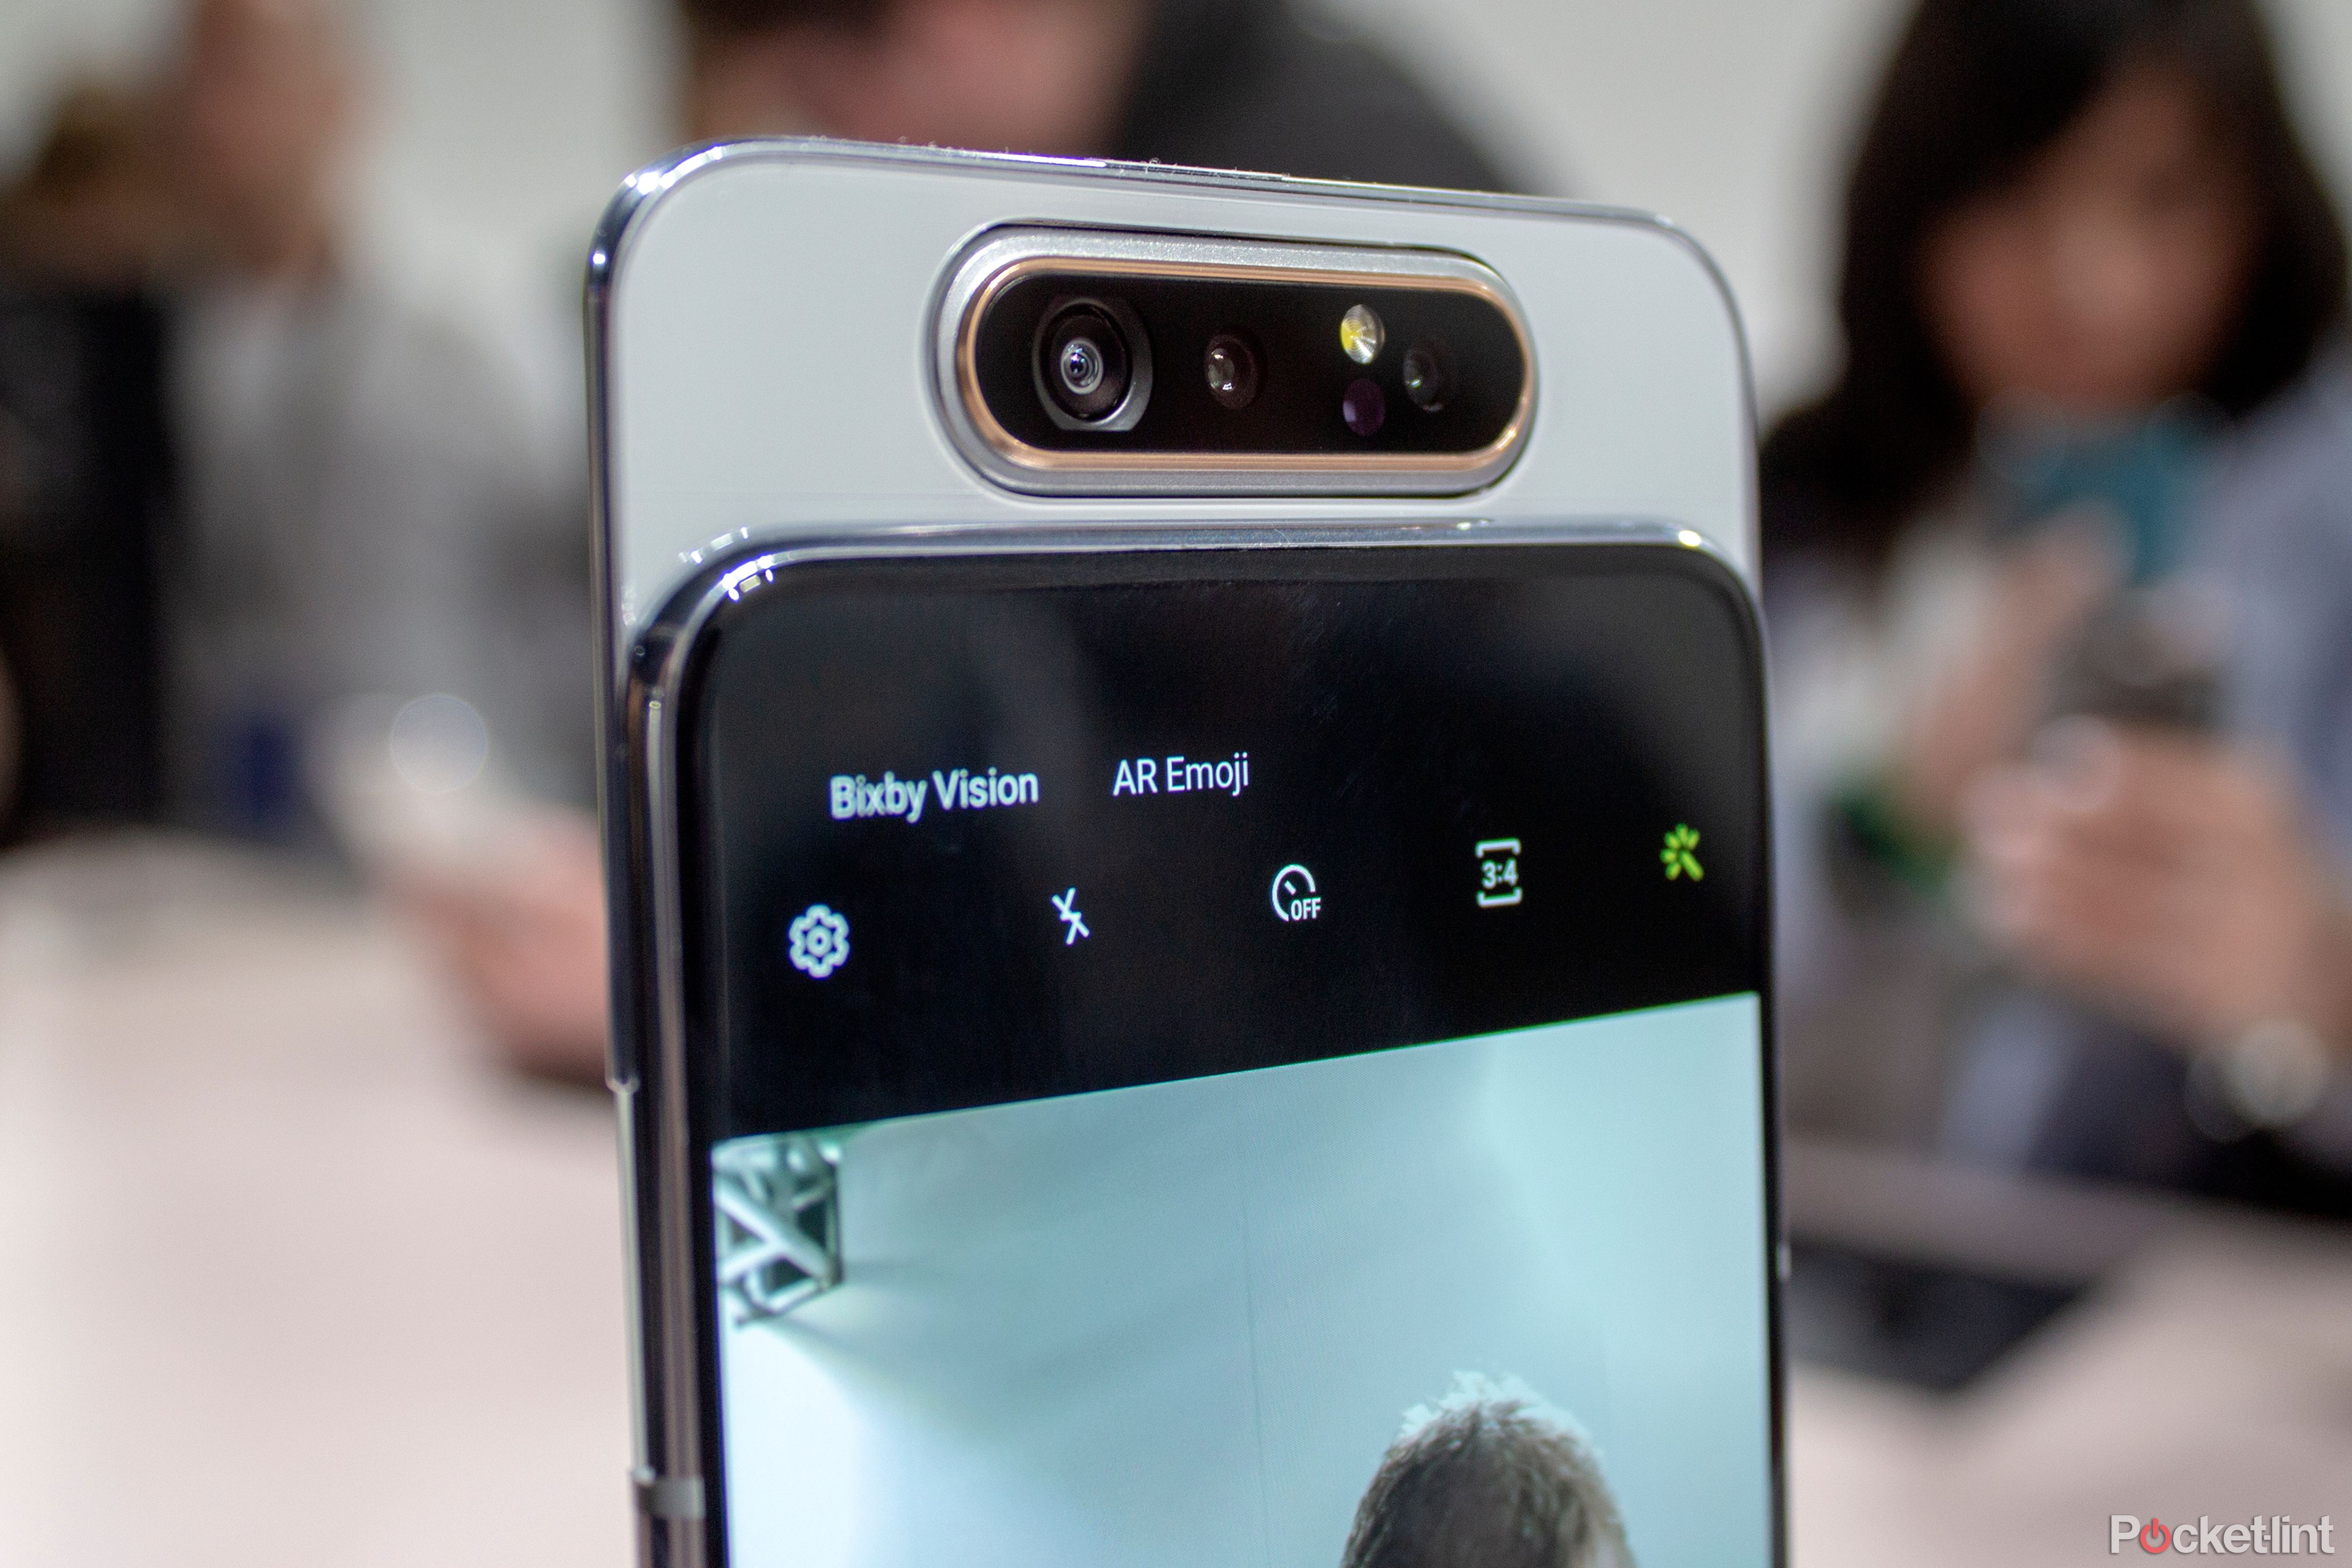 Samsung Galaxy A80 initial review product images image 2